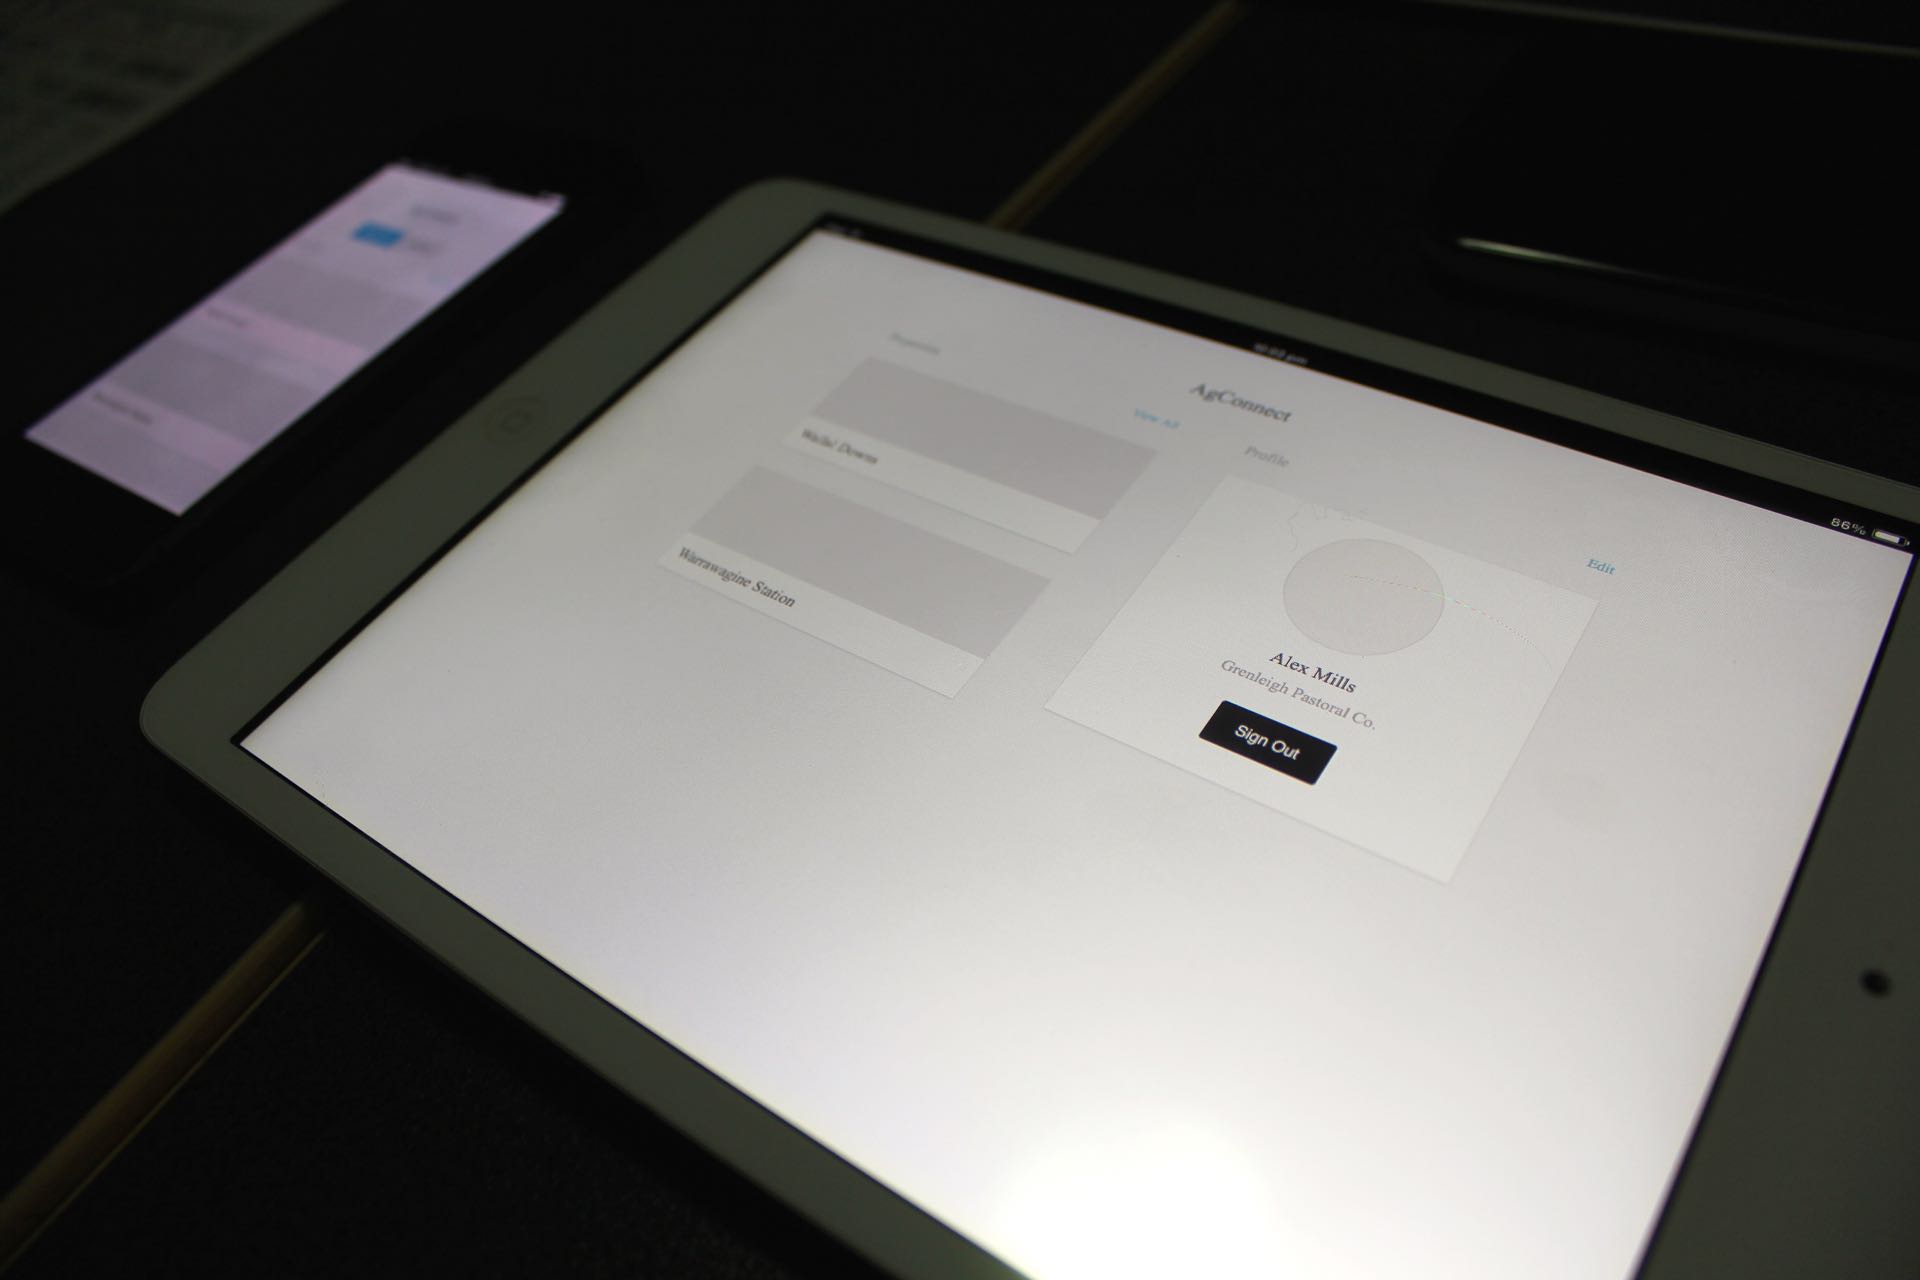 Early proof of concept design on an iPad